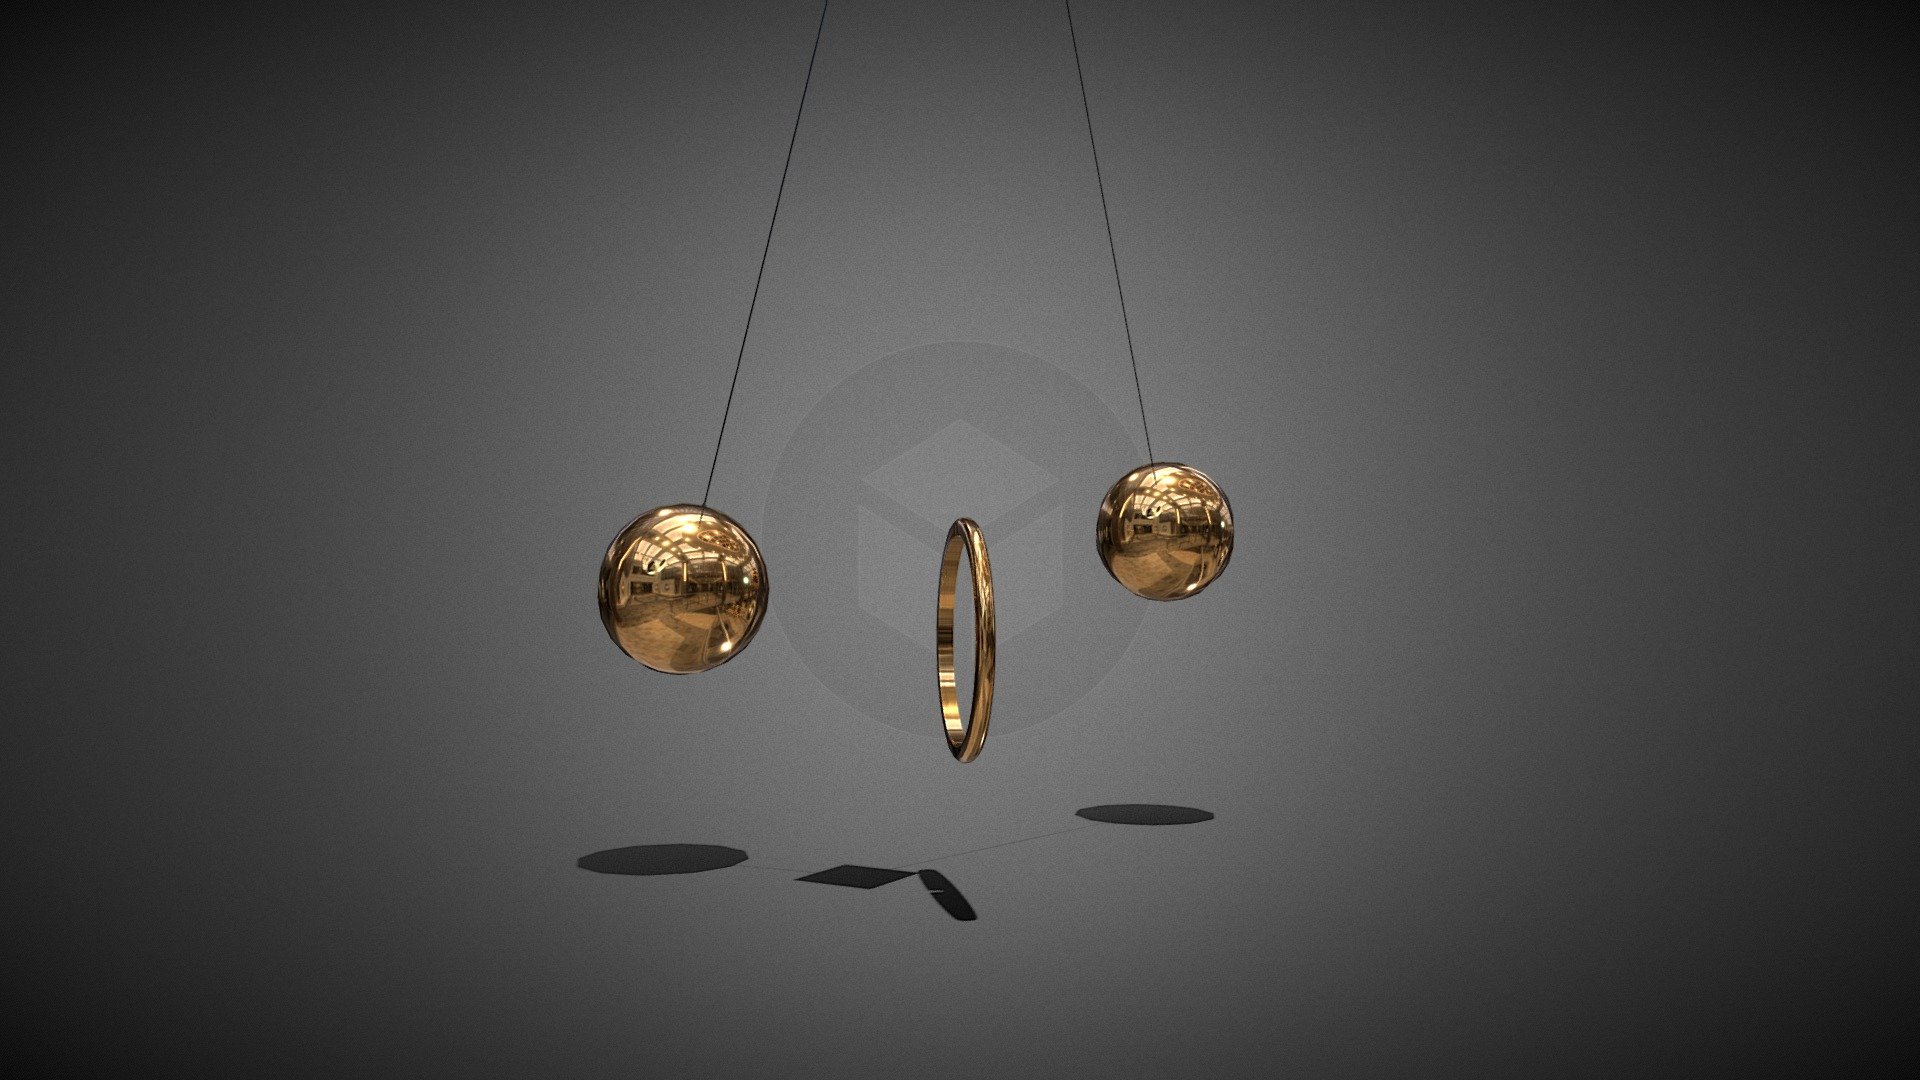 Satisfying animation of two swinging copper pendulums going through a ring with a small section cut out. Compatible with the open-source virtual world Decentraland.

3D model and animation by FGR3D of Low Poly Models 3d model